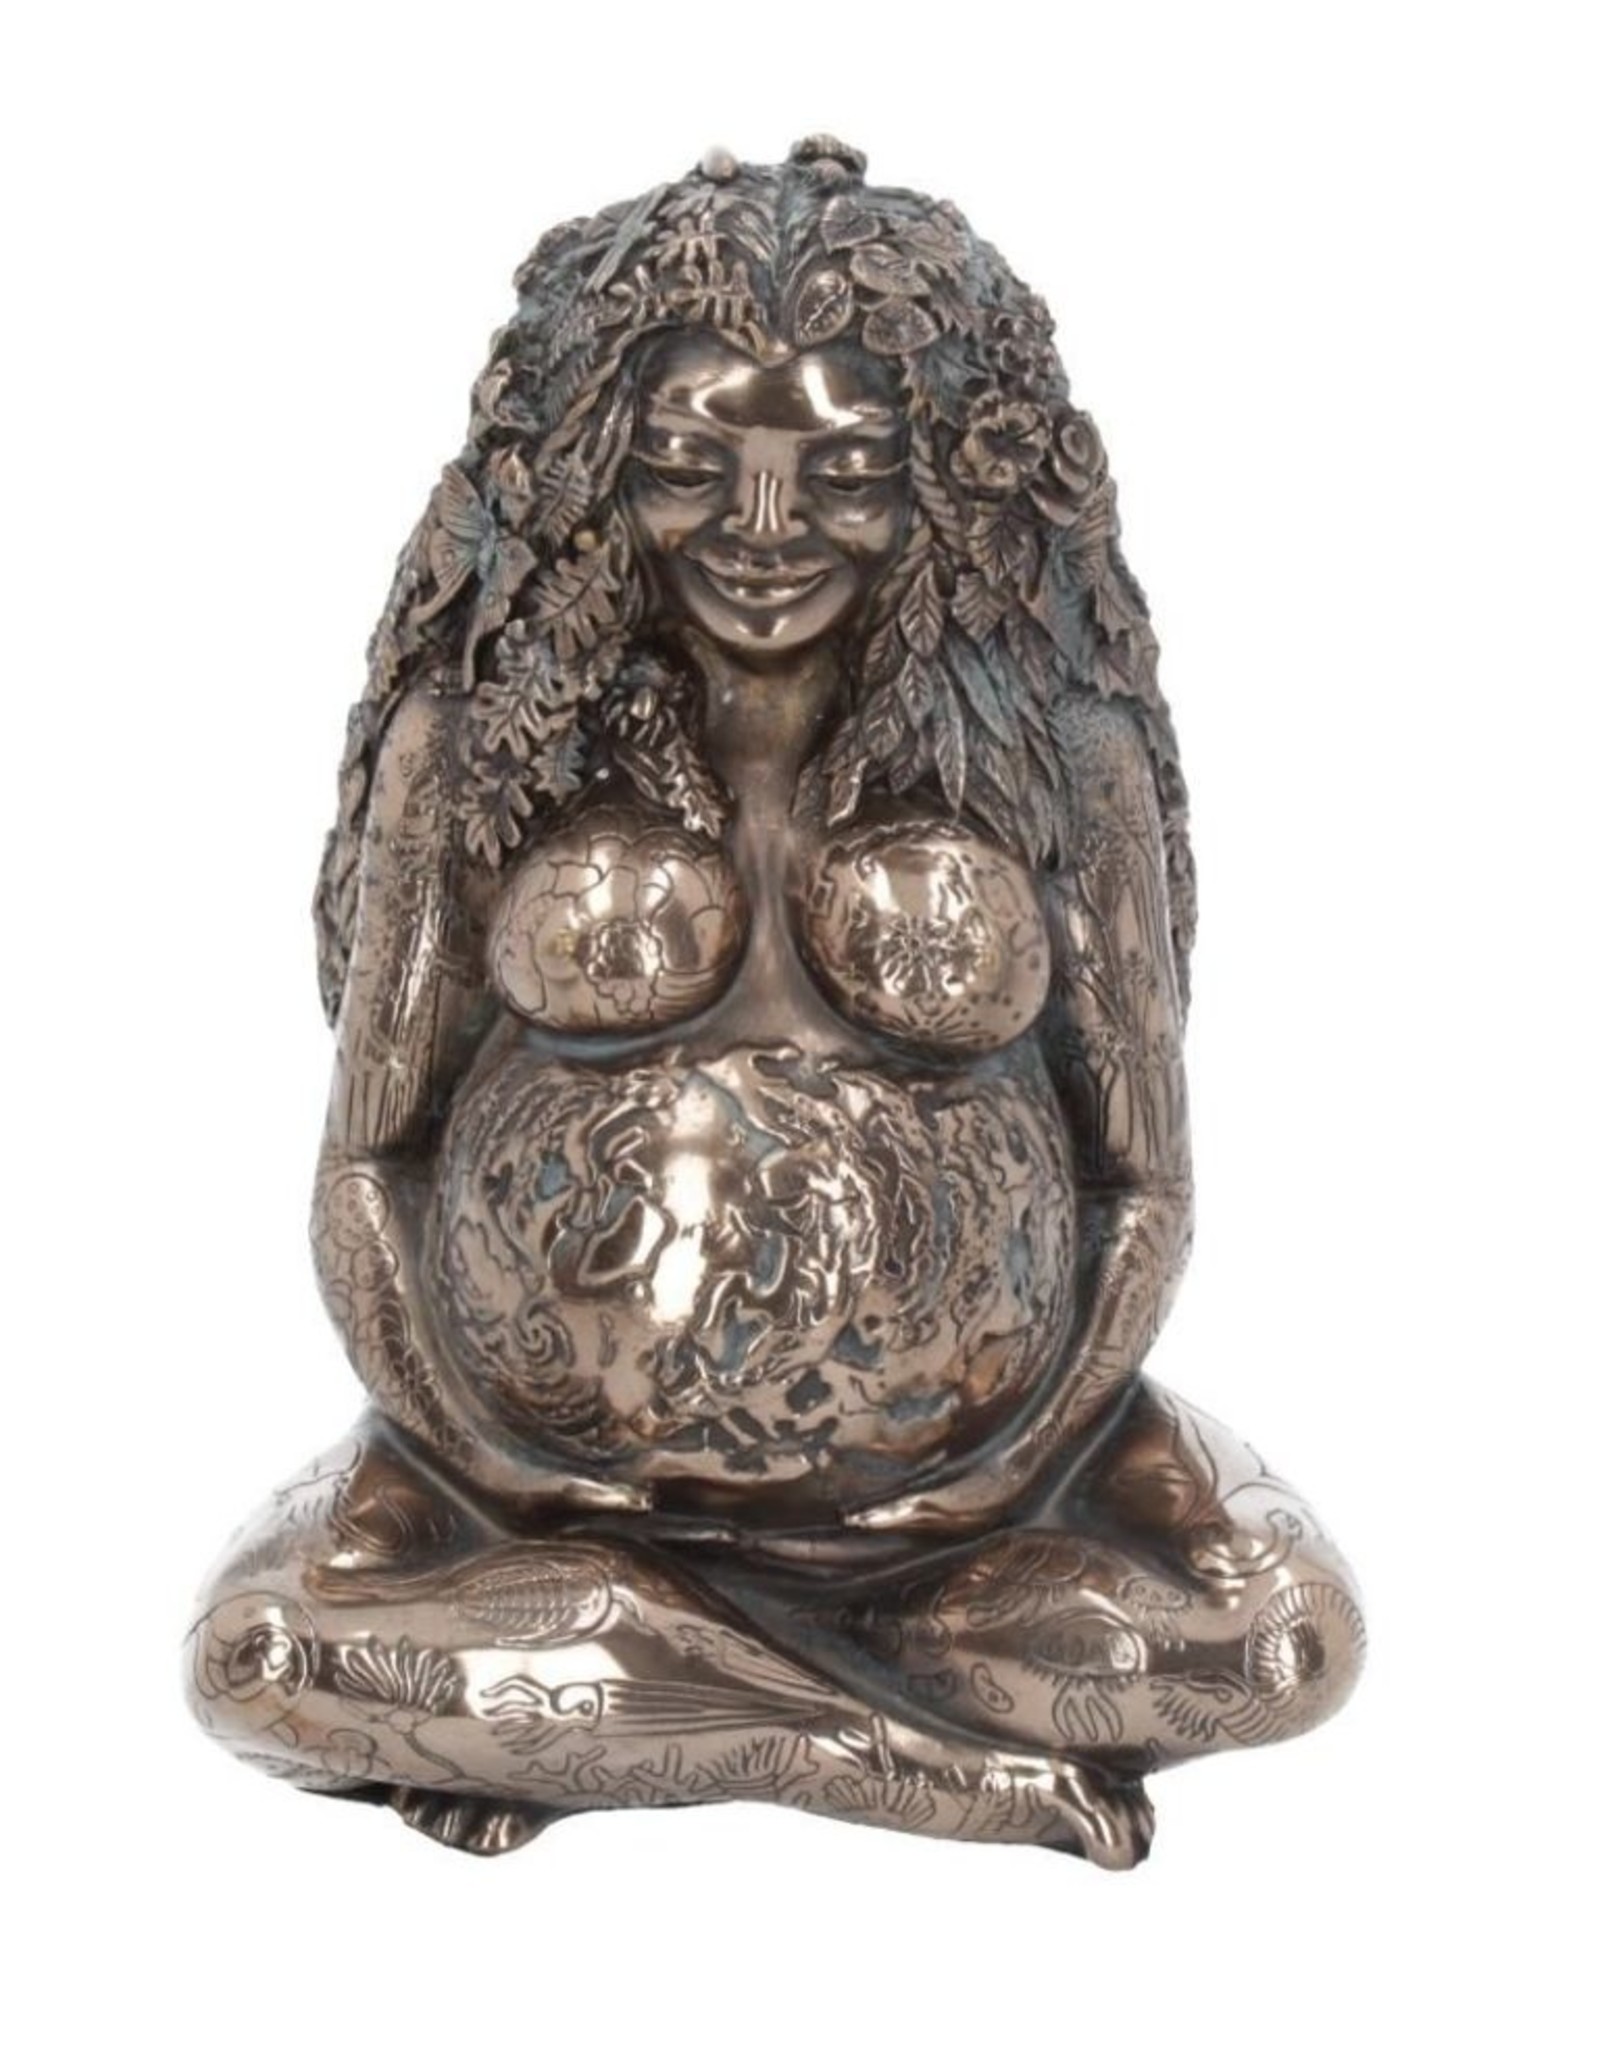 NemesisNow Giftware & Lifestyle - Mother Earth Bronze Finished Gaia Figurine 17.5cm